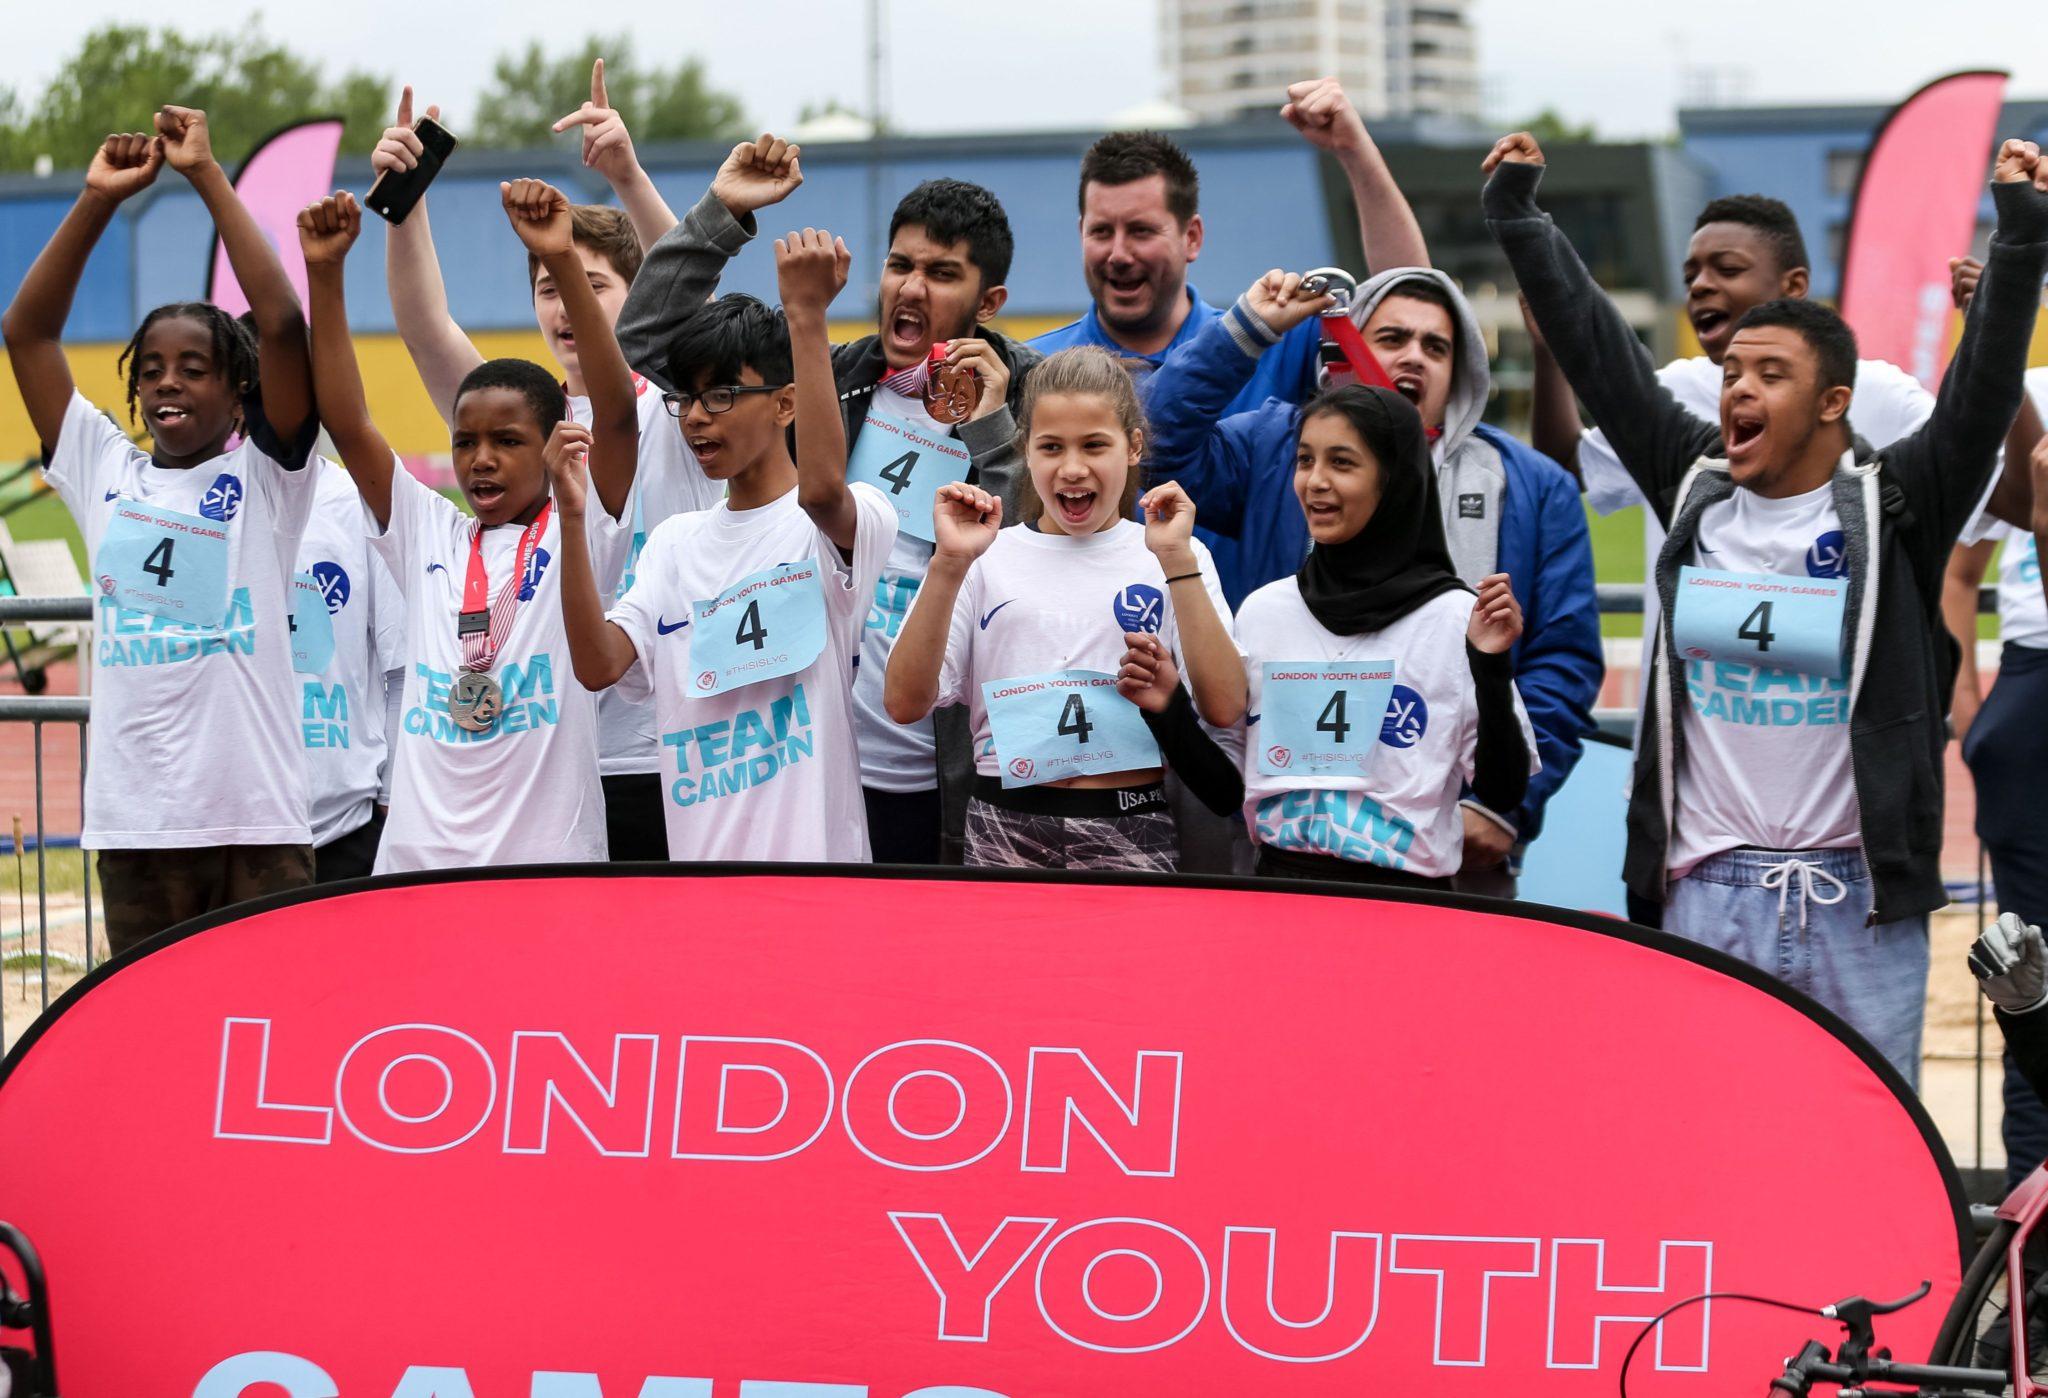 CAMDEN CROWNED LONDON YOUTH GAMES VIRTUAL GAMES CHAMPIONS London